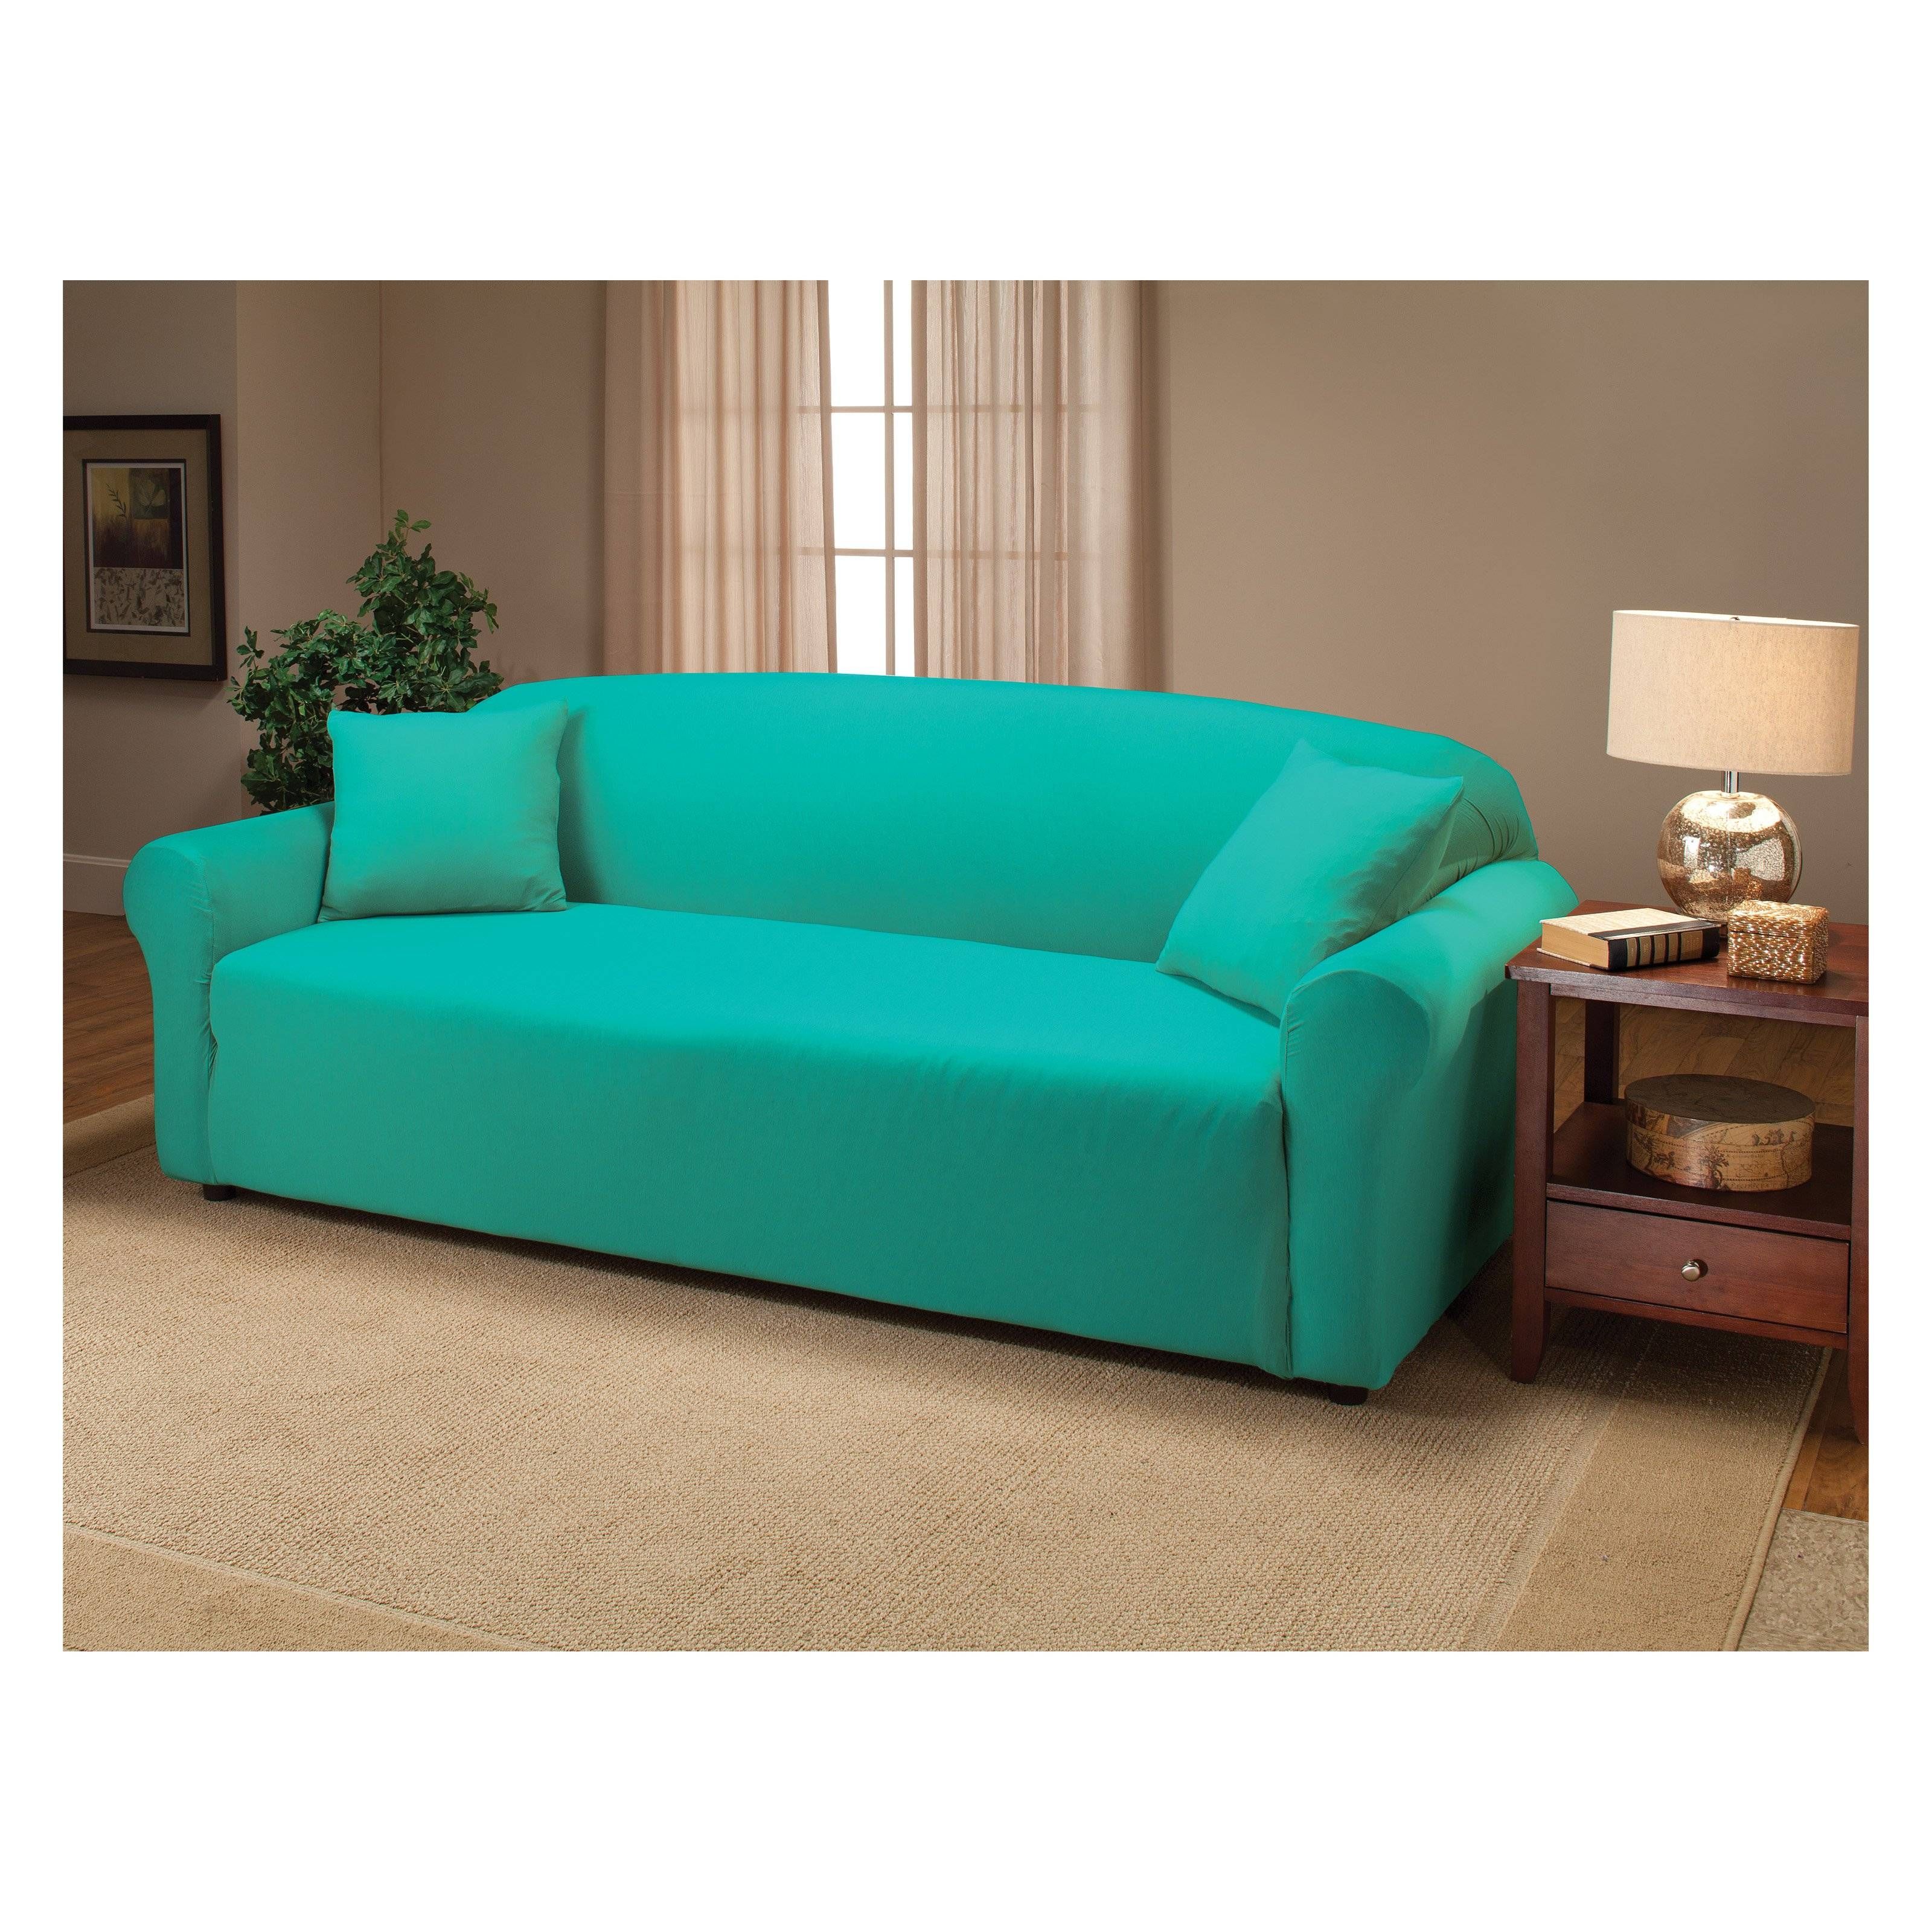 Sofa Covers On Hayneedle – Sofa Slipcovers For Sale Inside Slipcovers Sofas (View 29 of 30)